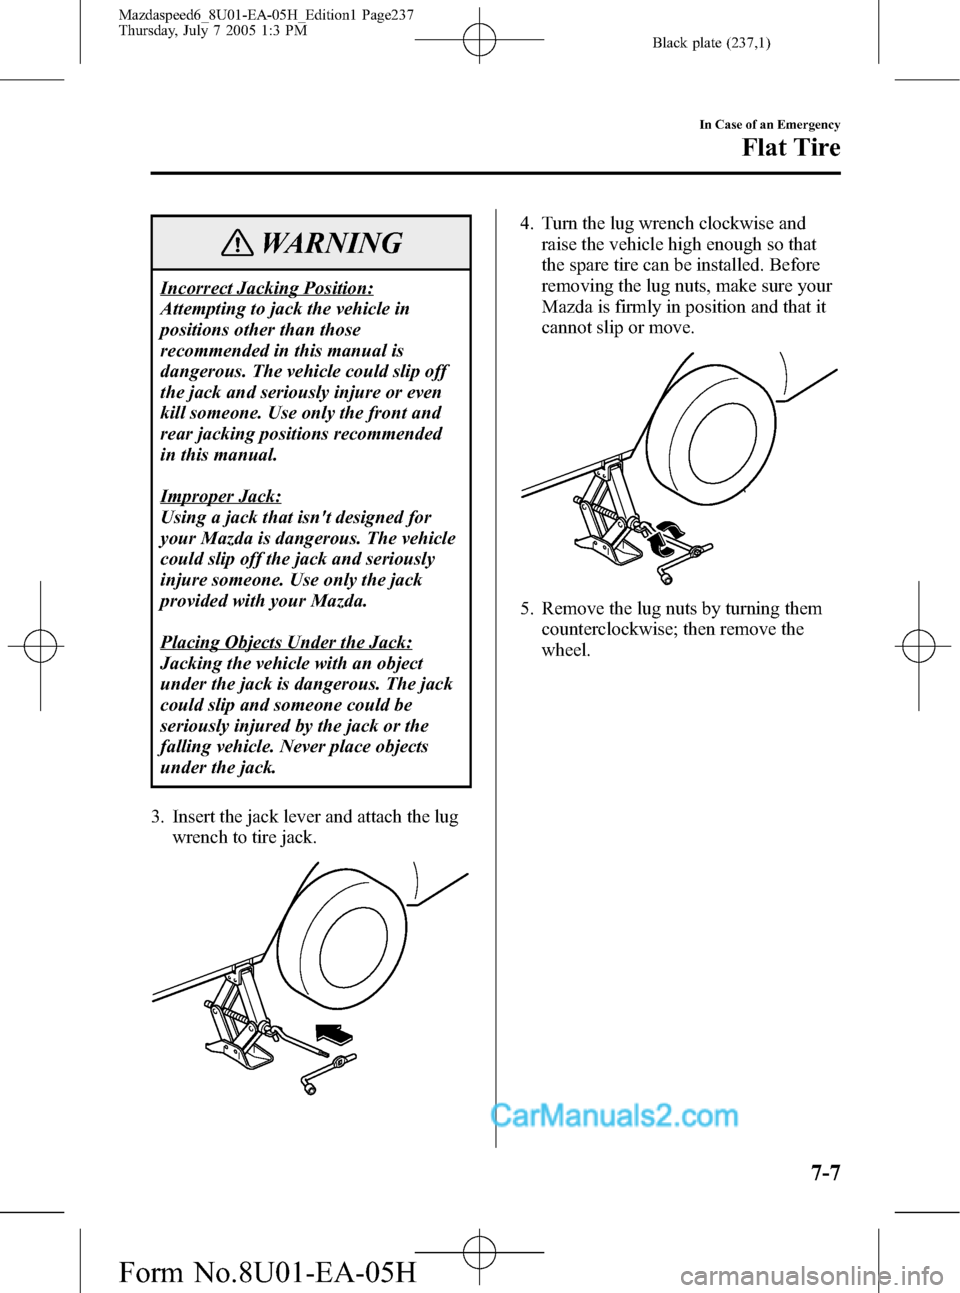 MAZDA MODEL MAZDASPEED 6 2006  Owners Manual (in English) Black plate (237,1)
WARNING
Incorrect Jacking Position:
Attempting to jack the vehicle in
positions other than those
recommended in this manual is
dangerous. The vehicle could slip off
the jack and se